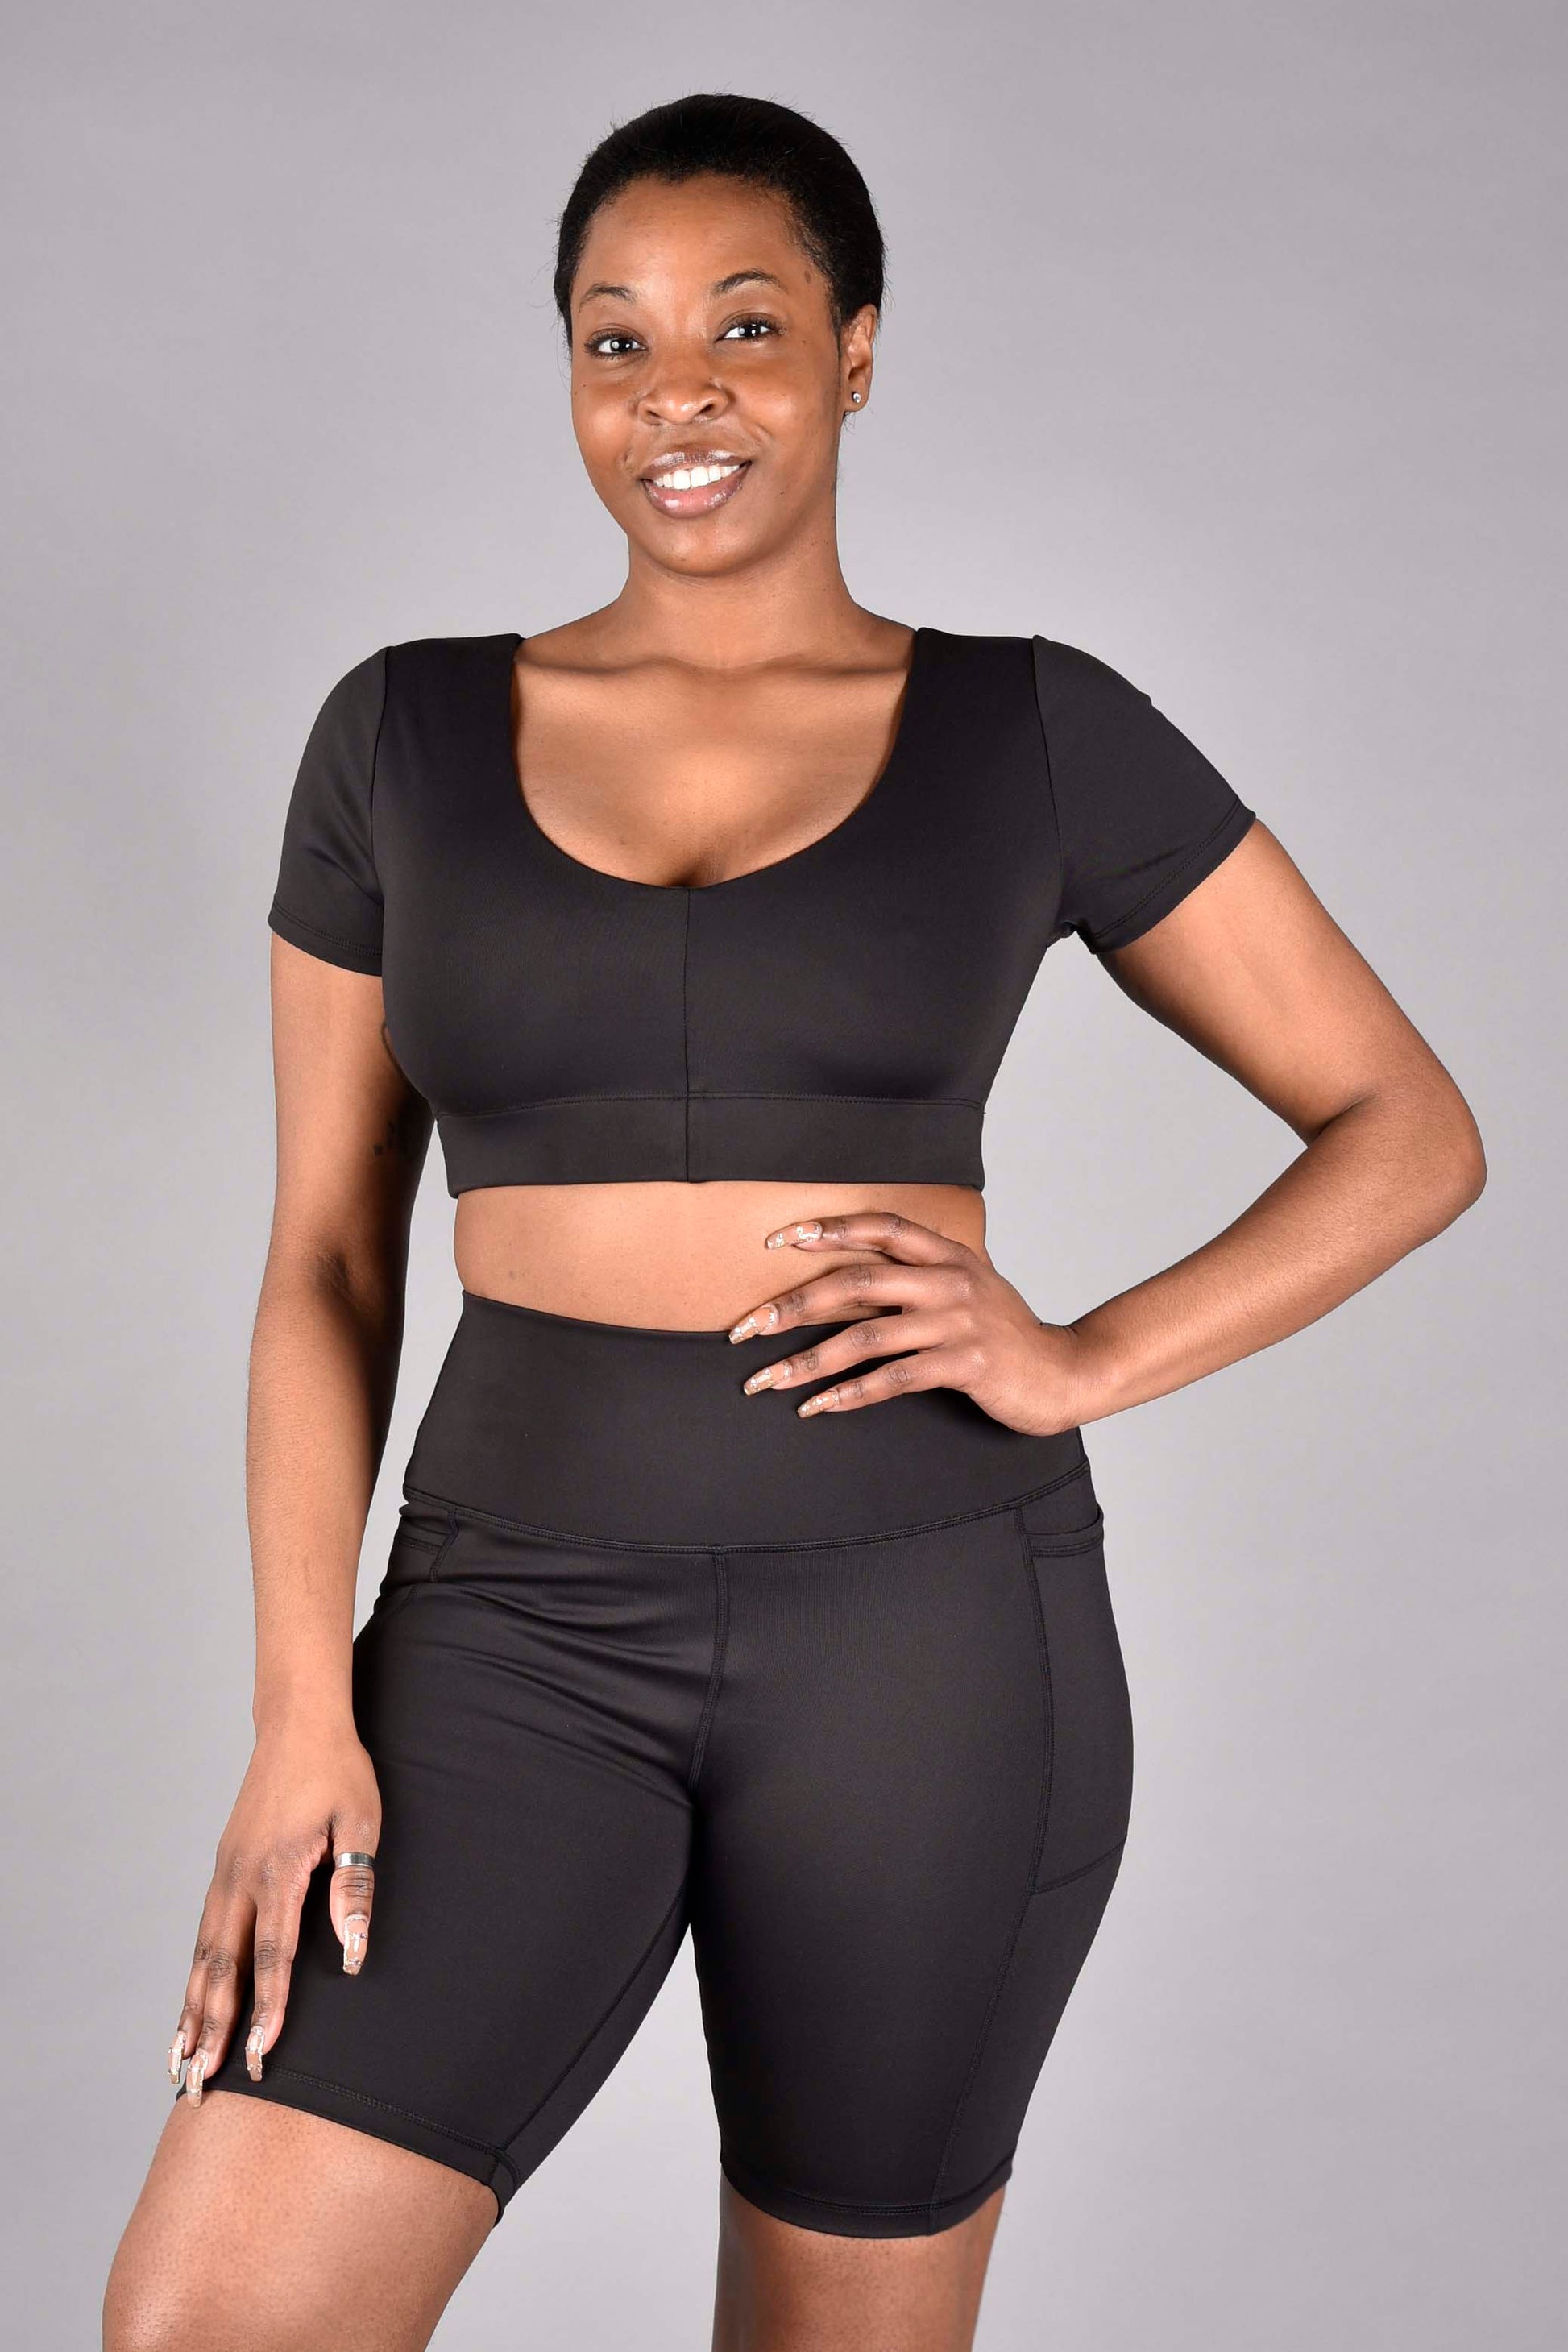 Women's Workout Tops, Sports Bras & More